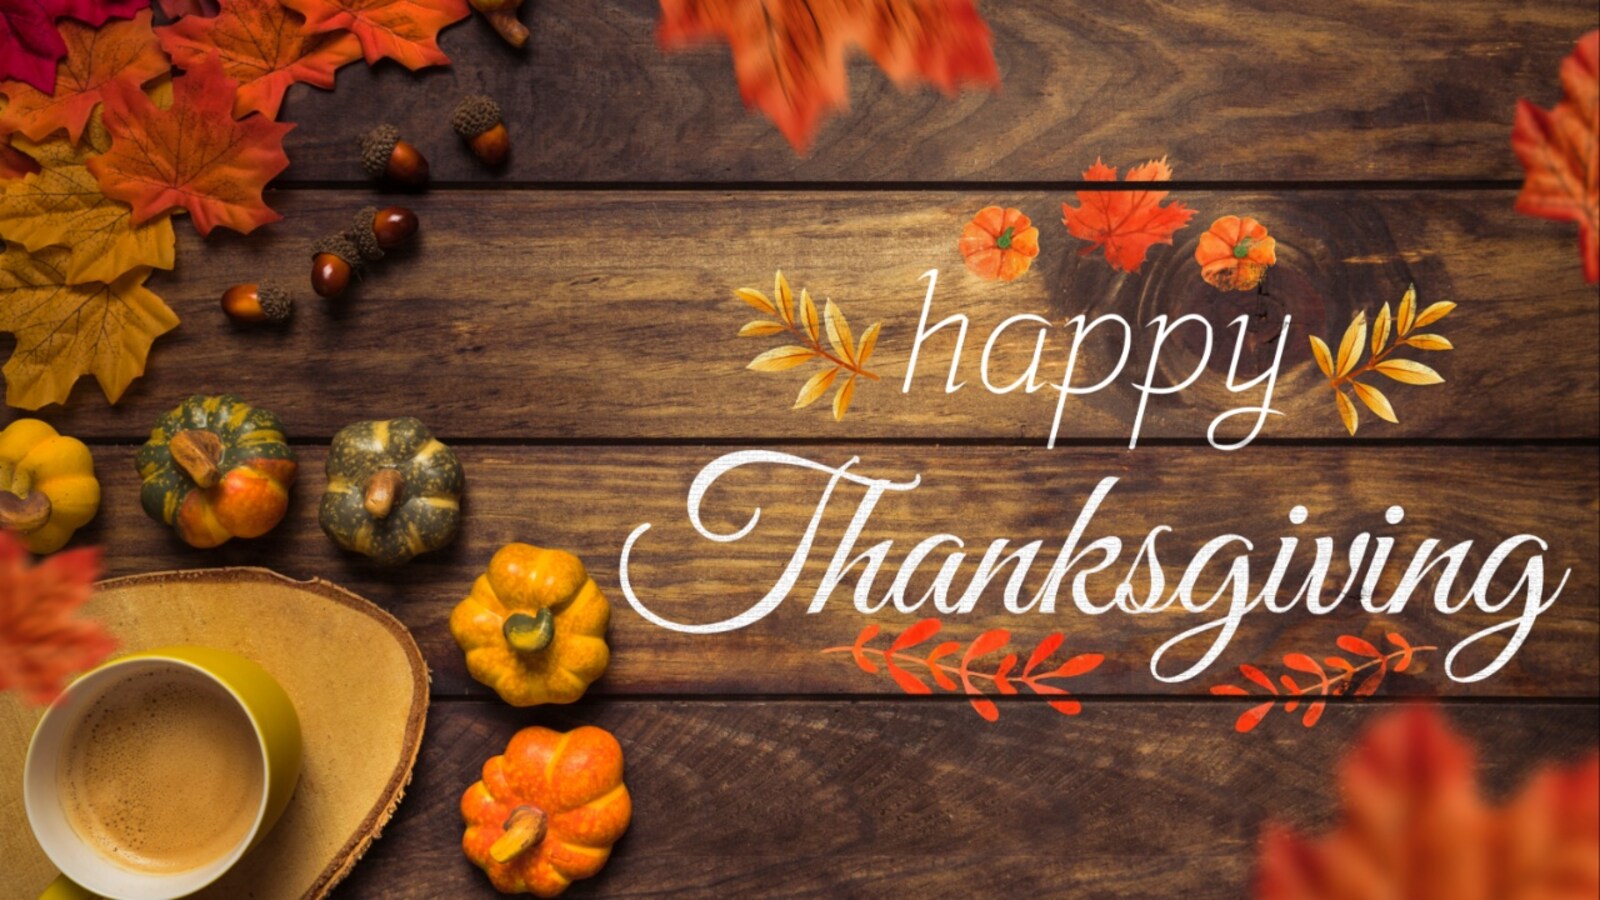 Happy Thanksgiving Day 2023 Images, Get the Best Collection of